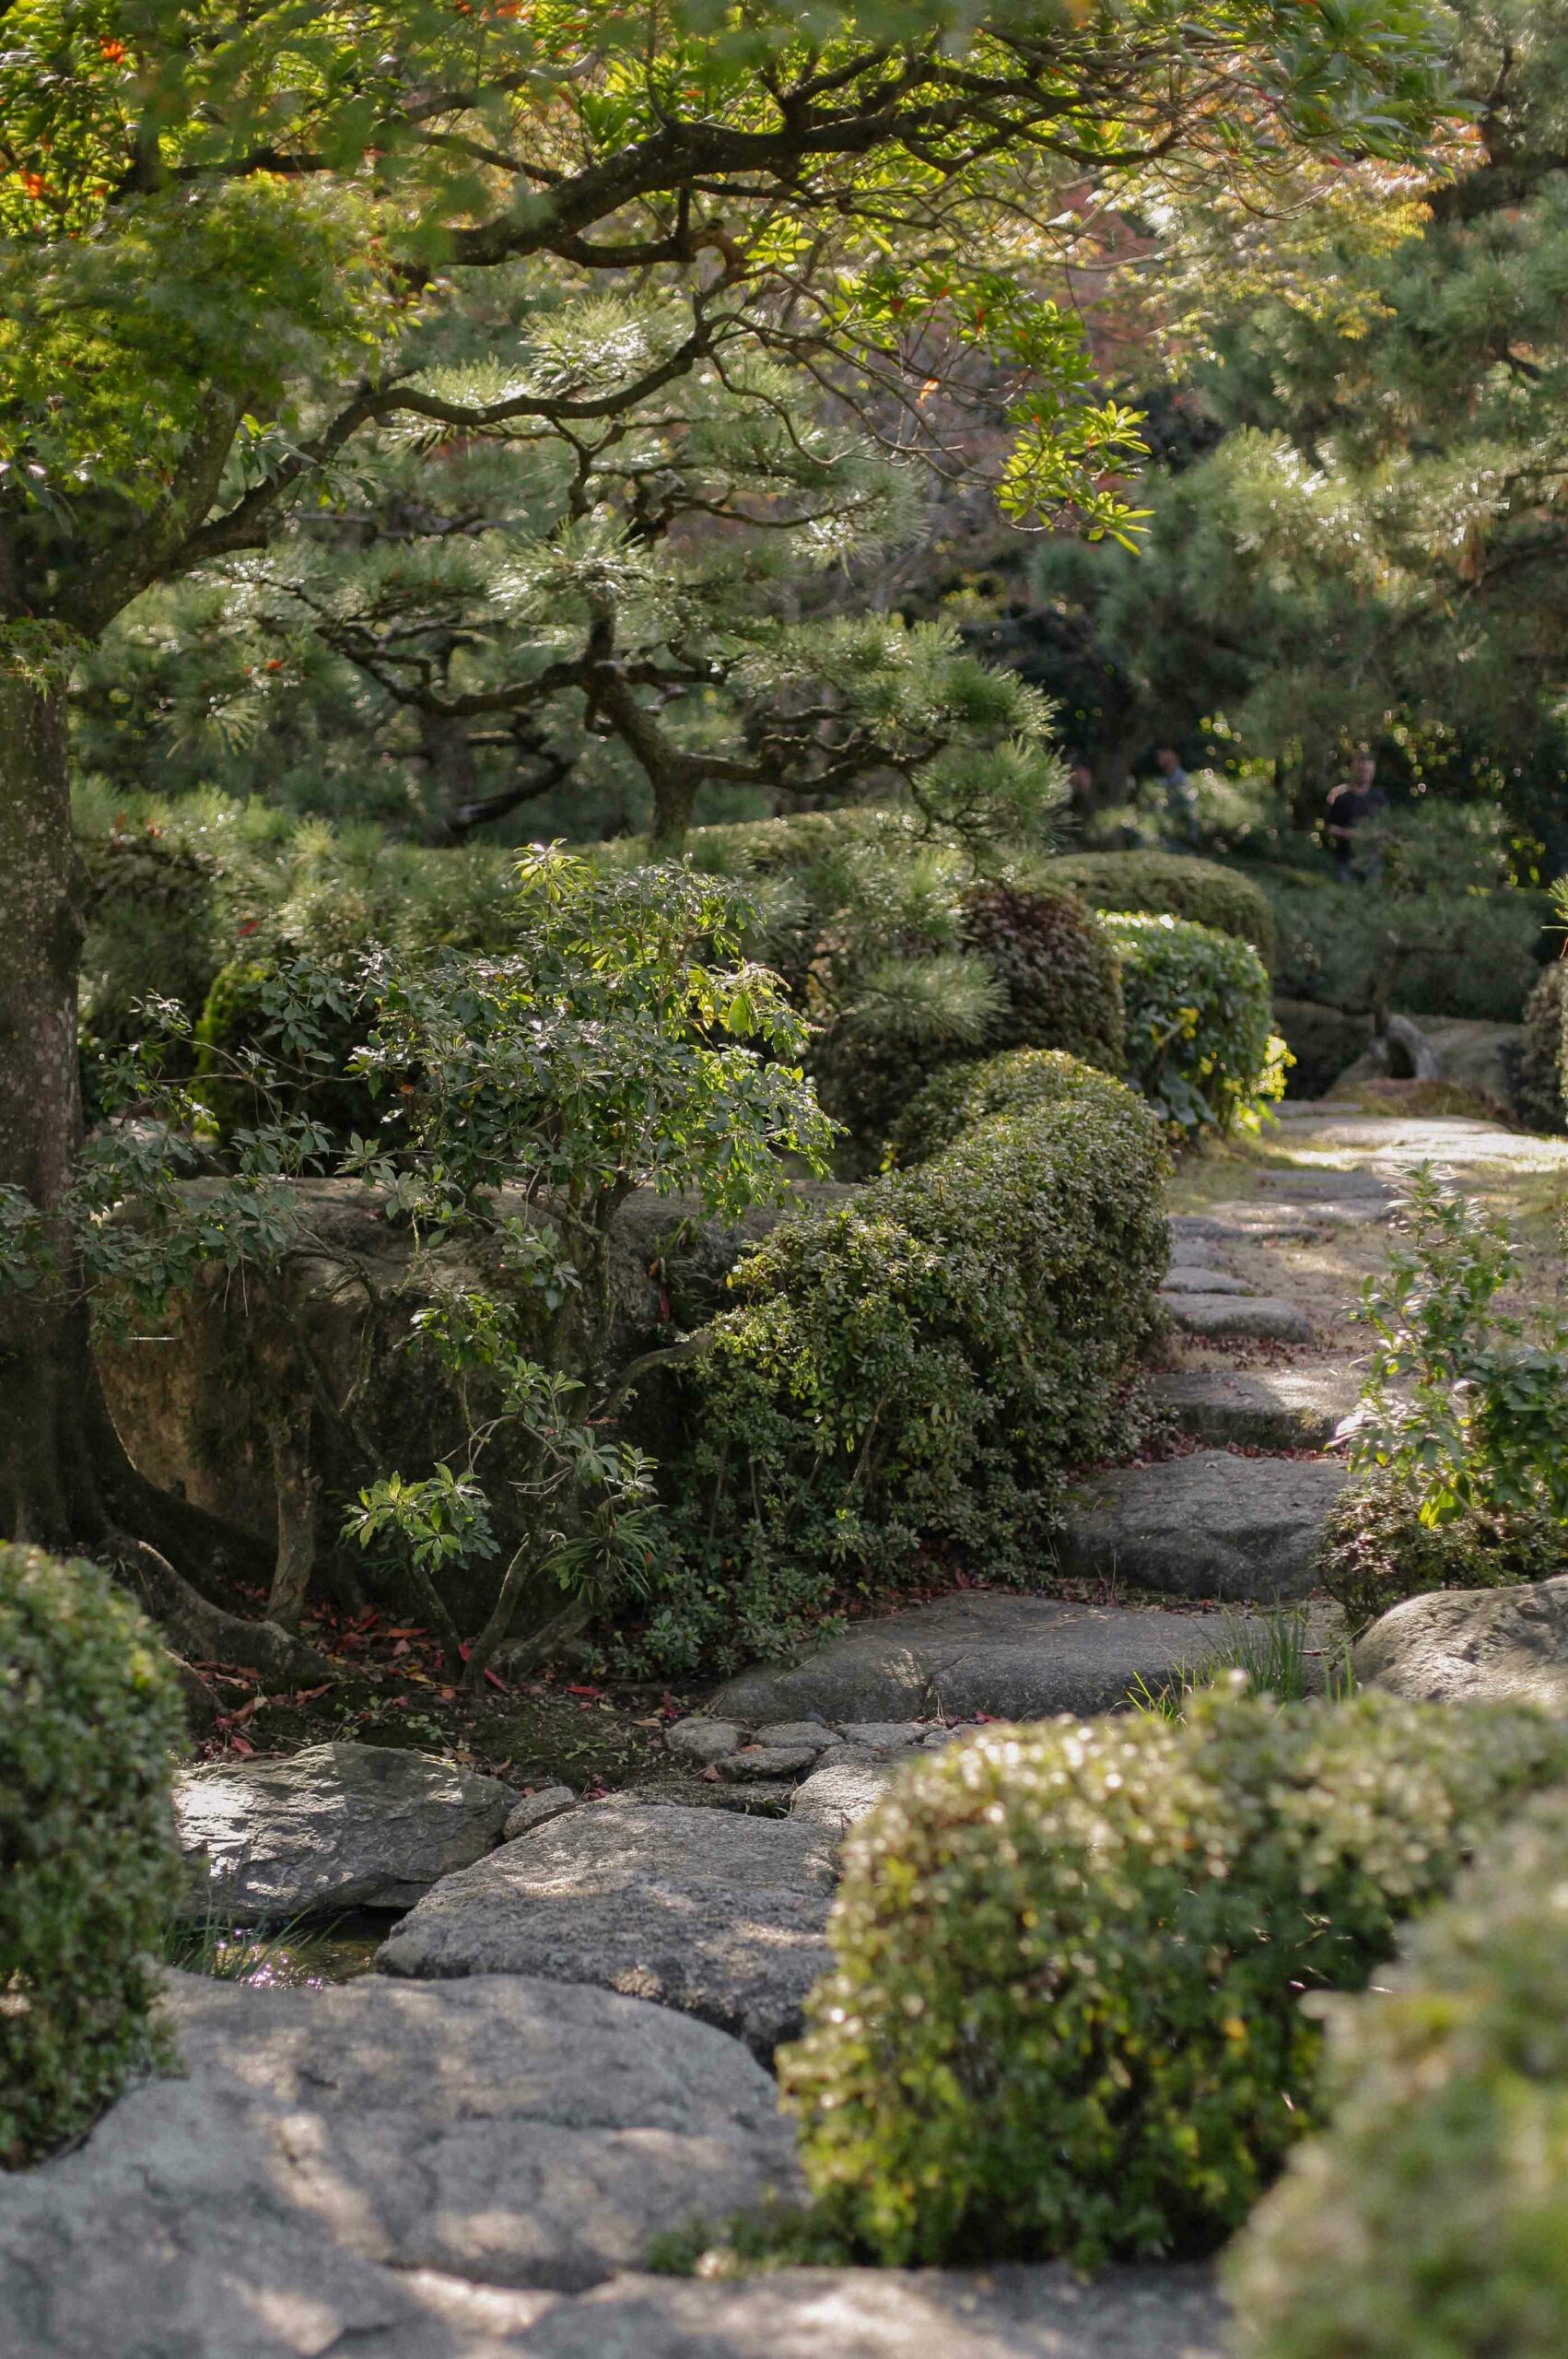 Ōhori Park Japanese Garden is planted with pines, maples and a variety of plants.